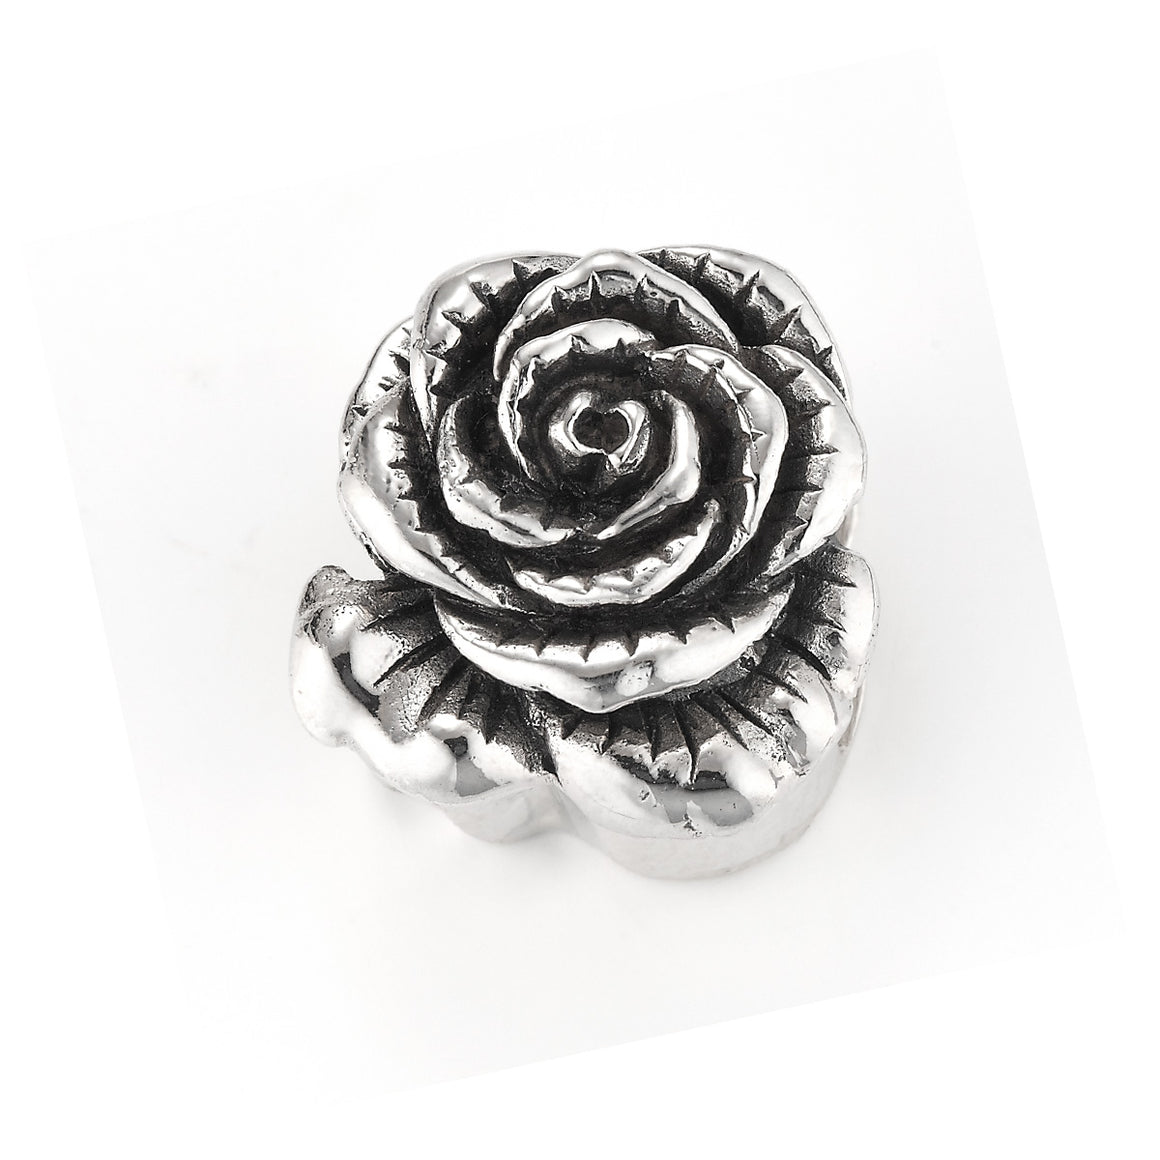 "Roses are Red" slide charm